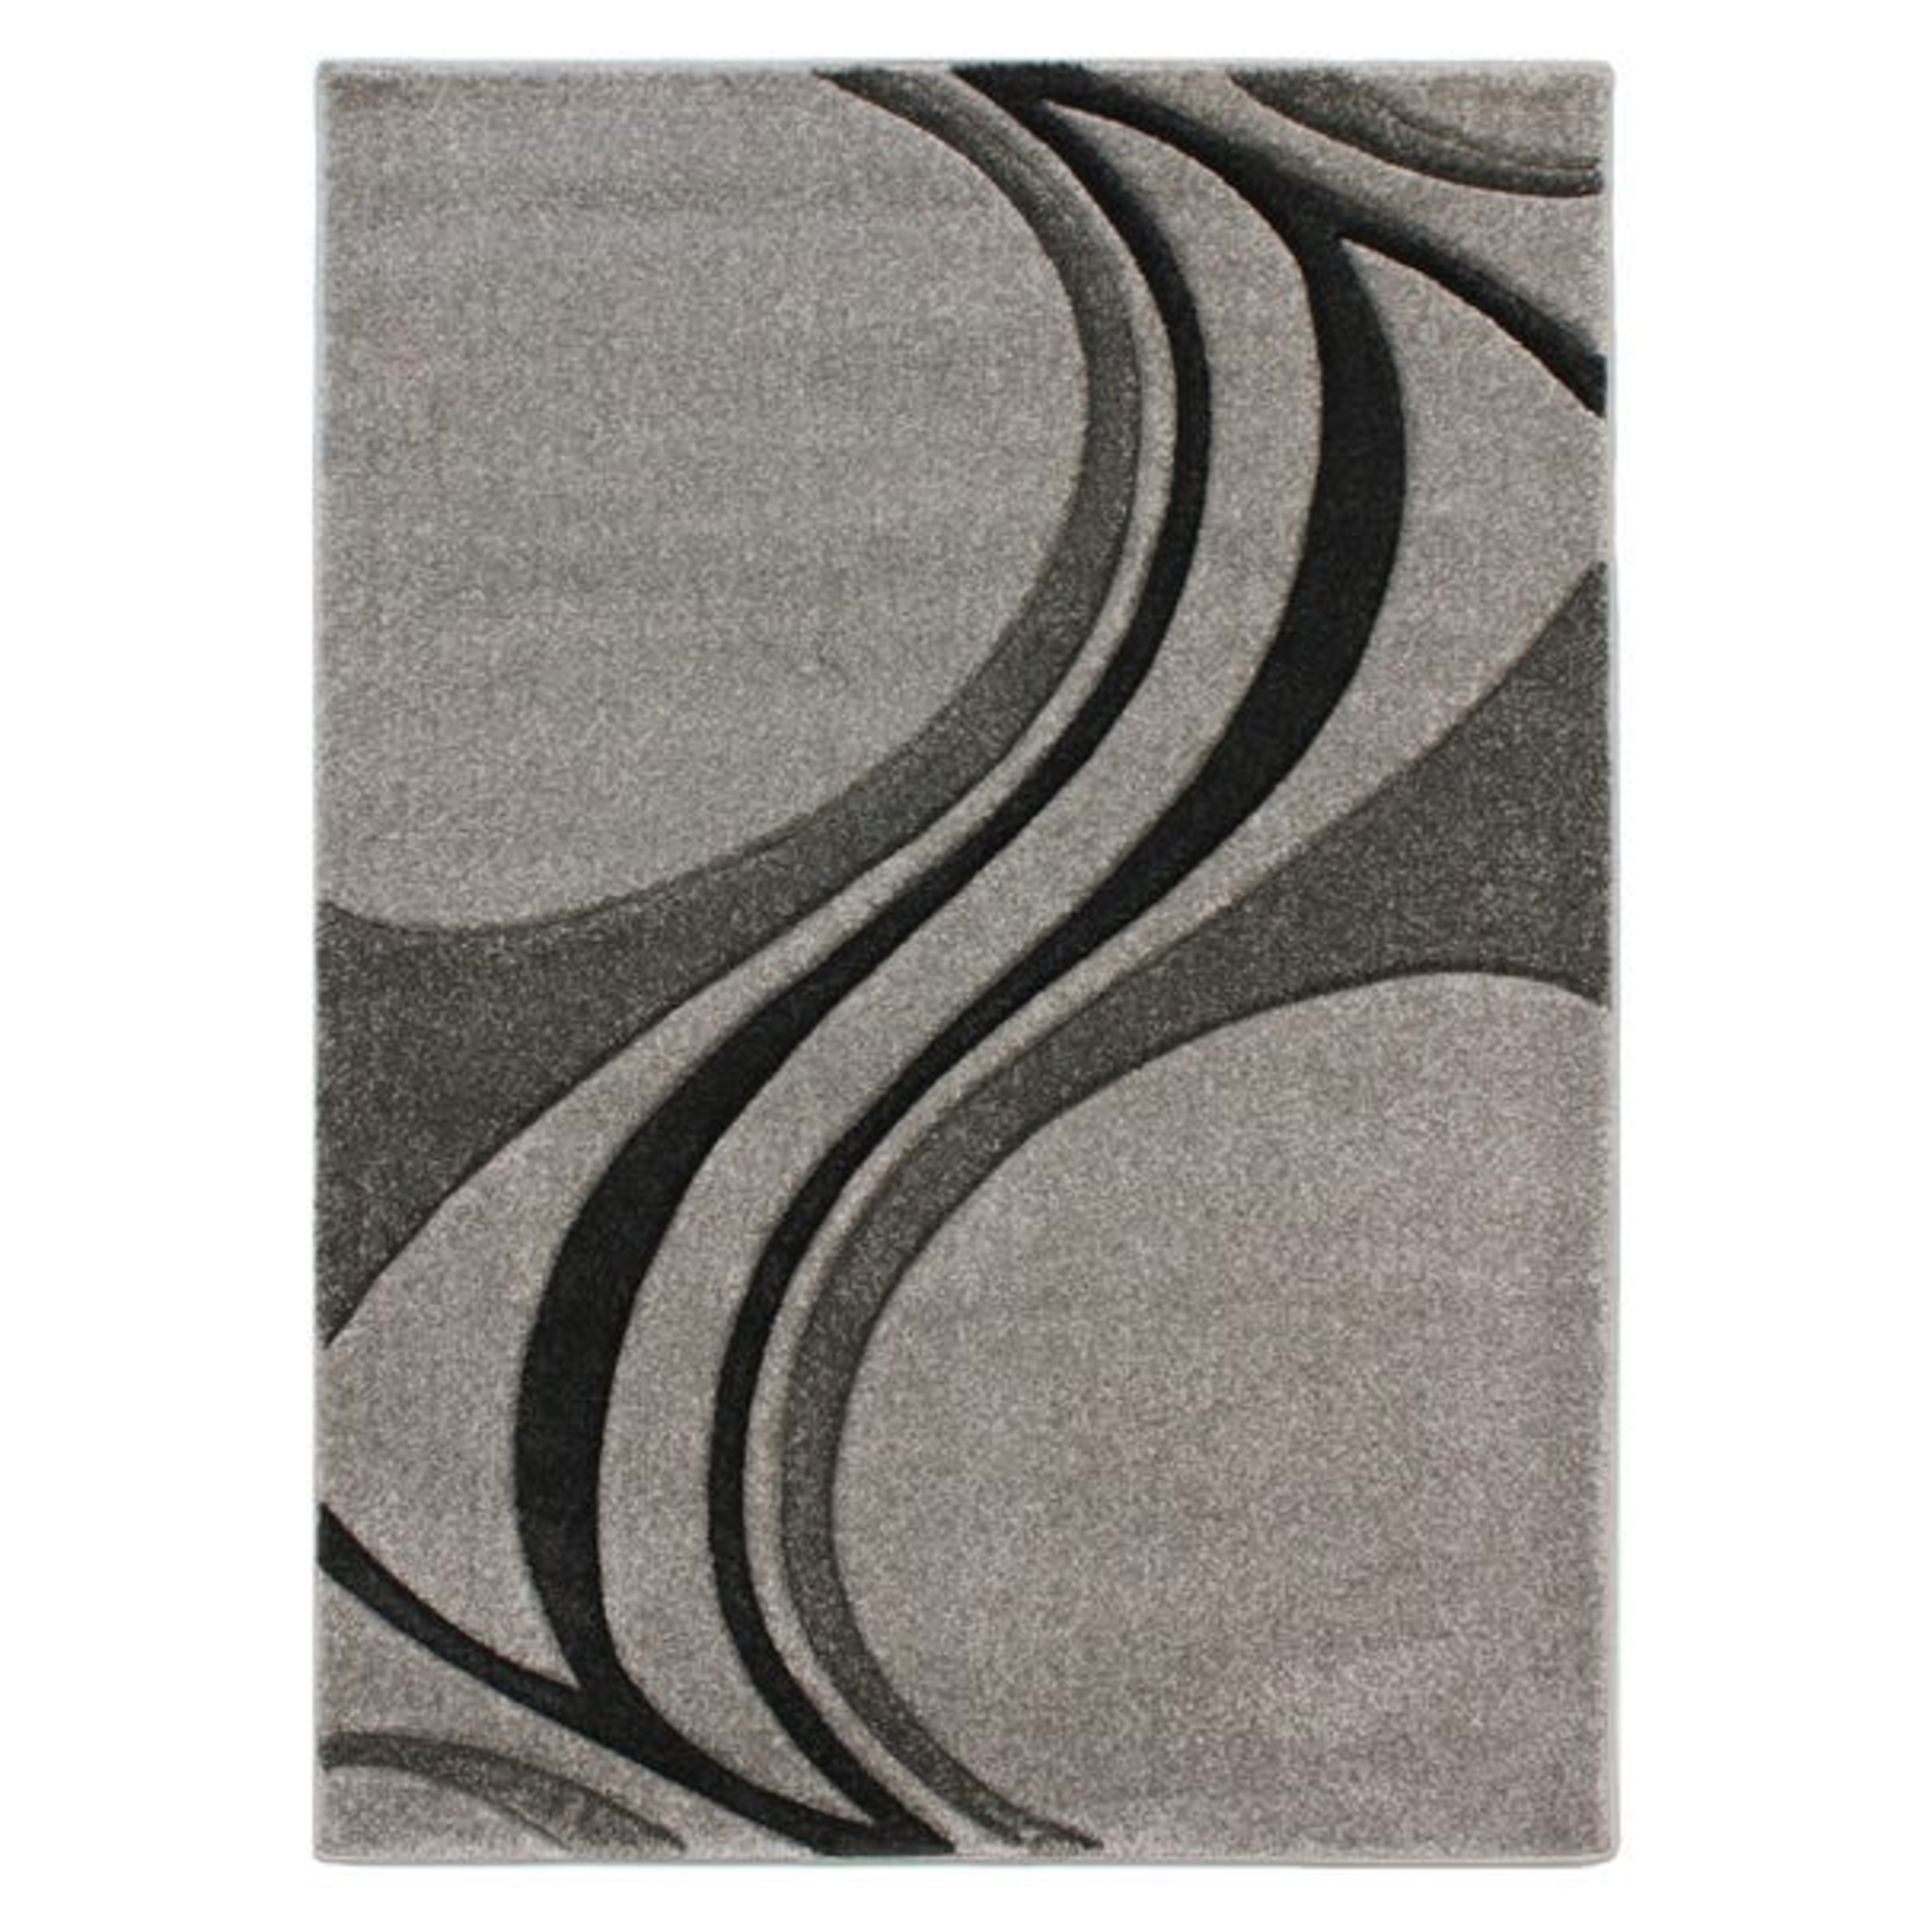 Monte Carlo D040 Mirage Rug In Charcoal 40X60Cm RRP 08 About the Product(s) Range: MONTE CARLO